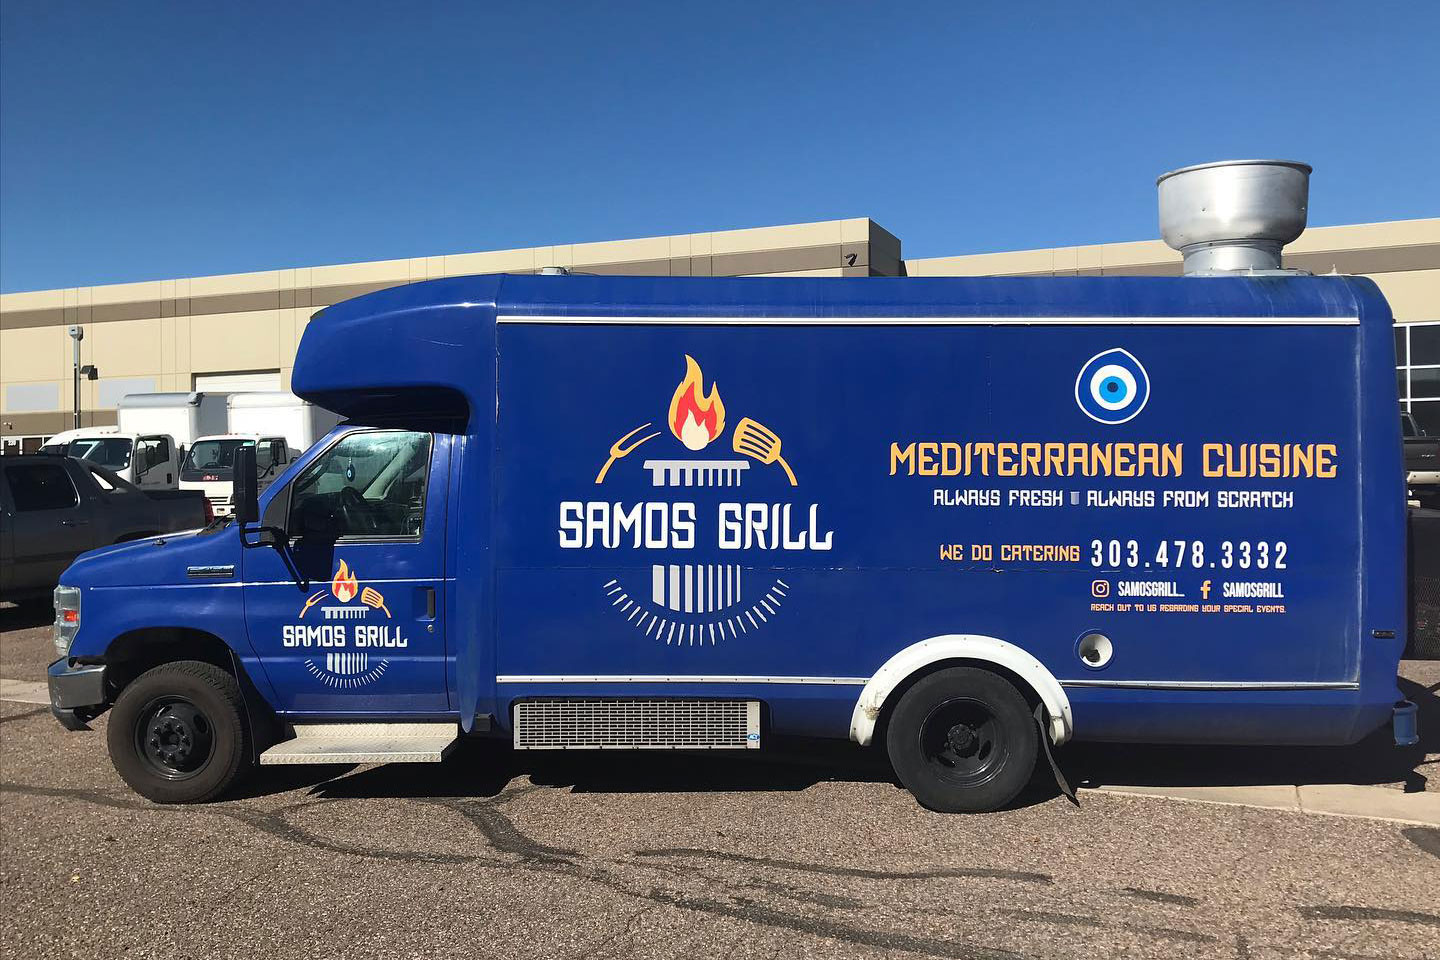 Samos Grill is a Mediterranean food truck & catering service. They have all-natural food made using the best ingredients.